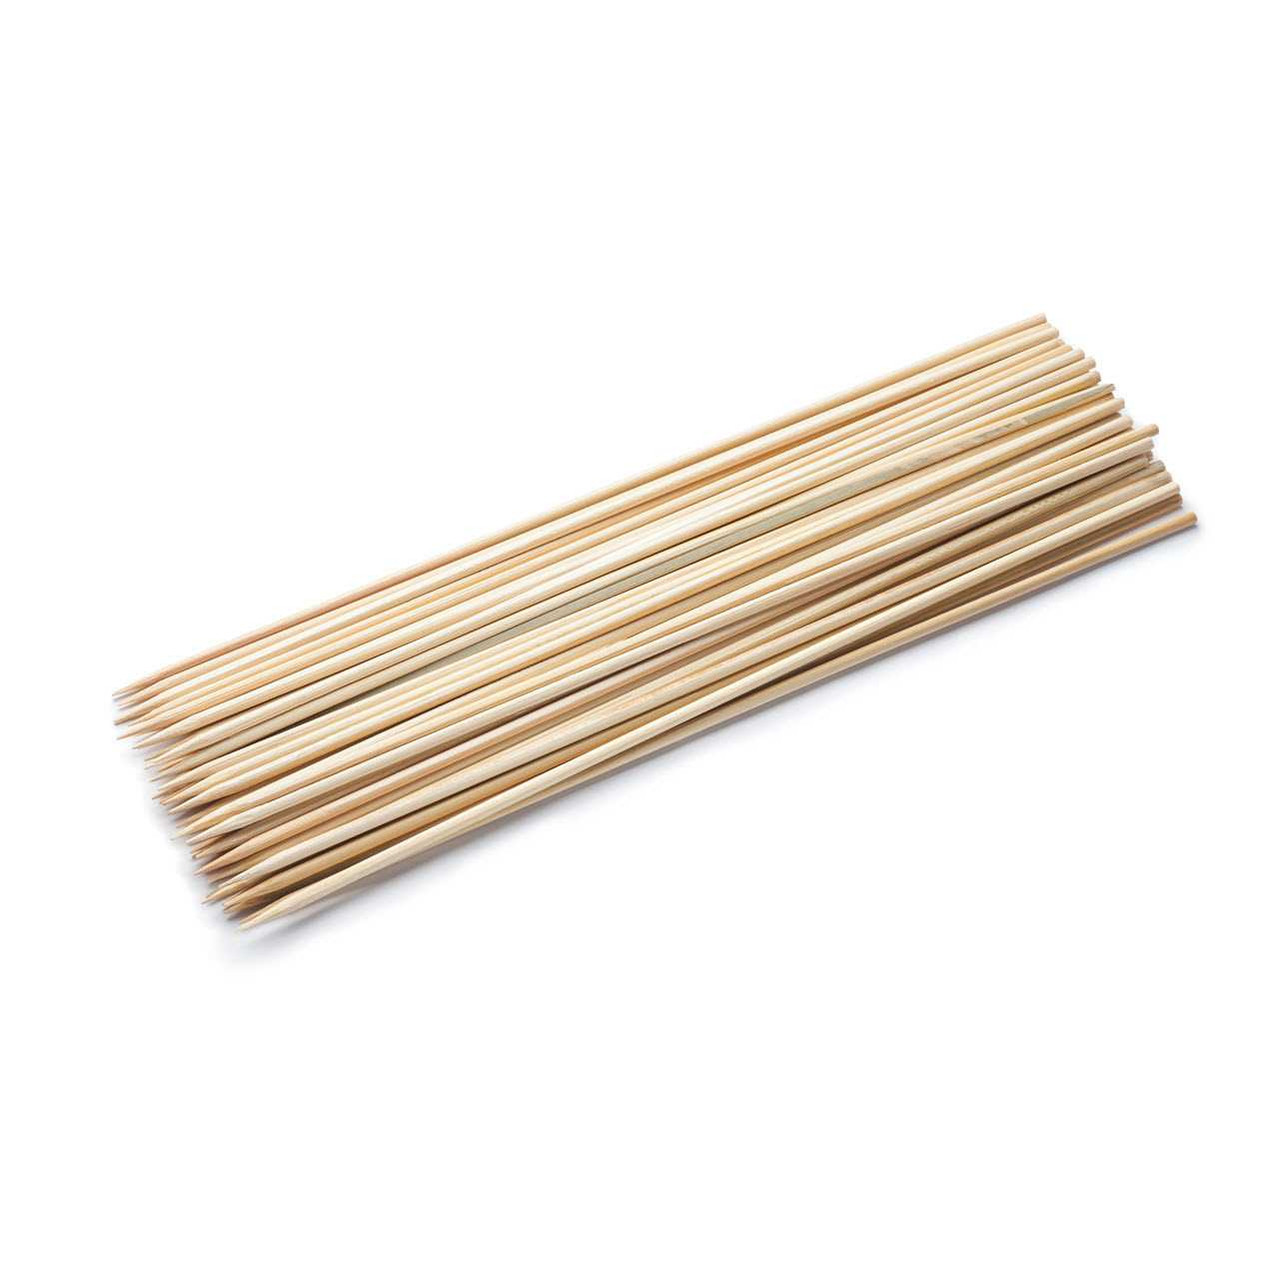 https://cdn11.bigcommerce.com/s-21kj3ntgv1/images/stencil/1280x1280/products/171/2596/Bamboo-skewers-10-inch-out-of-packaging__07199.1657411921.jpg?c=2